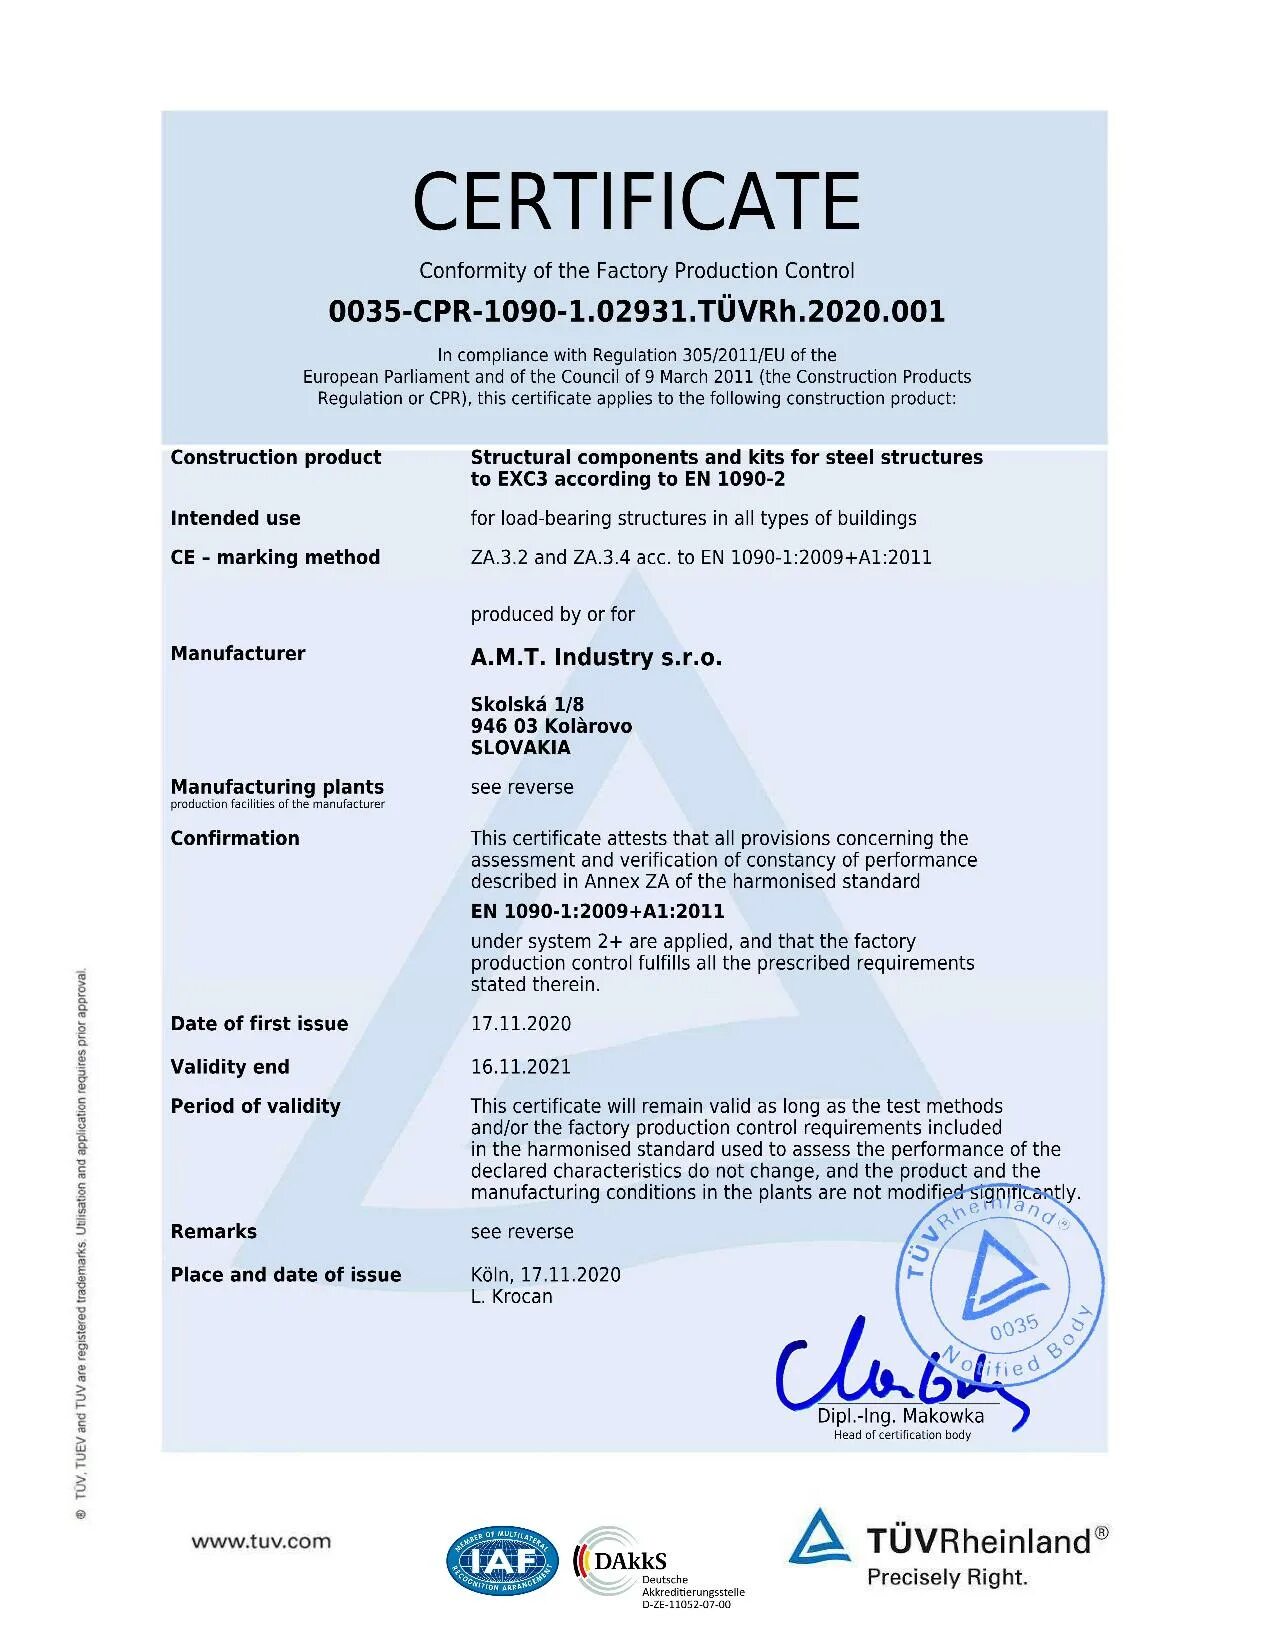 Certificate of conformity Germany. Certificate of conformity of the Factory Production Control. Conformity Certificate китайский.